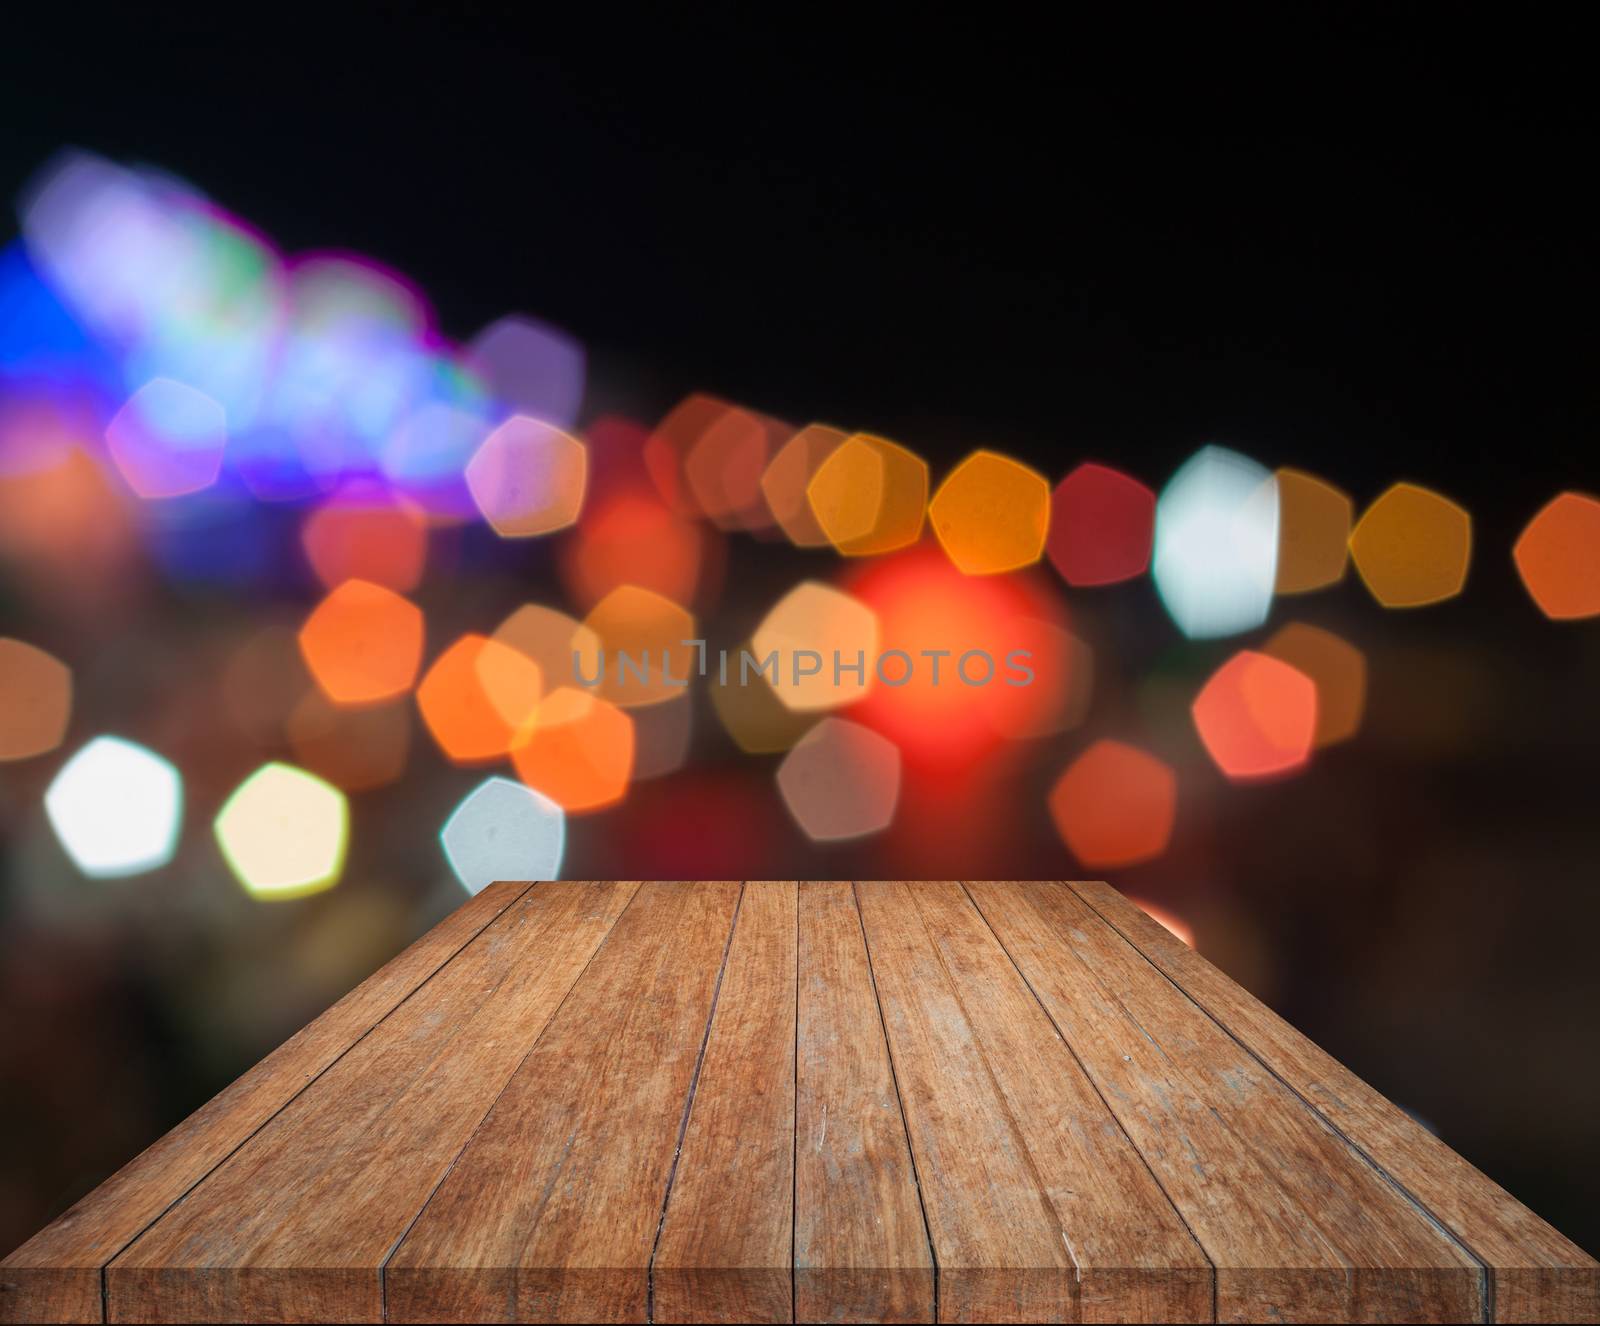 Top wooden with abstract blurred bokeh lights, stock photo